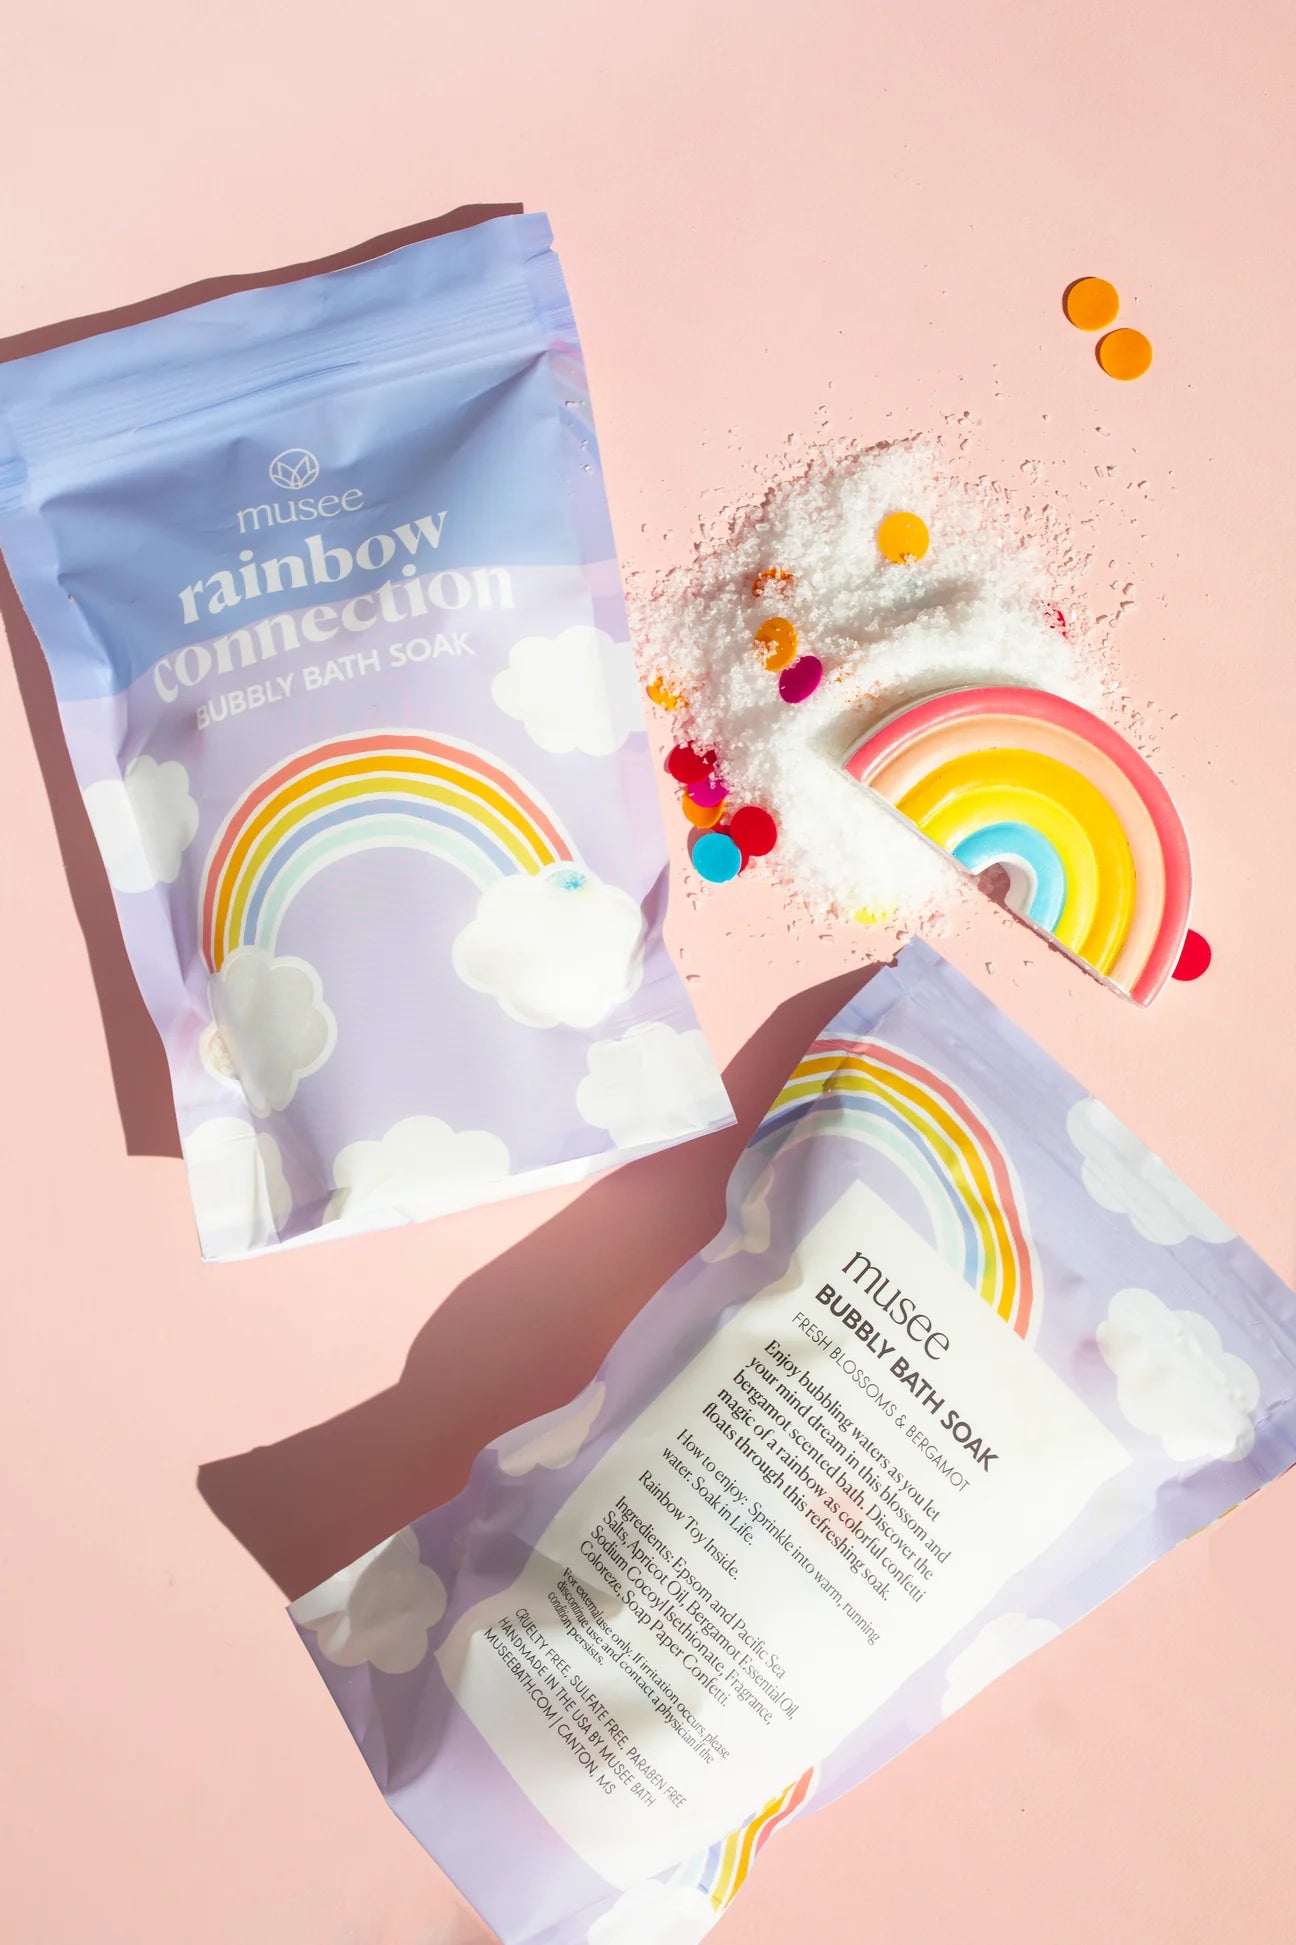 A bag of Rainbow Connection Bubbly Bath Soak and a bag of sprinkles creating a magical oasis on a pink background. (Brand: Musee)